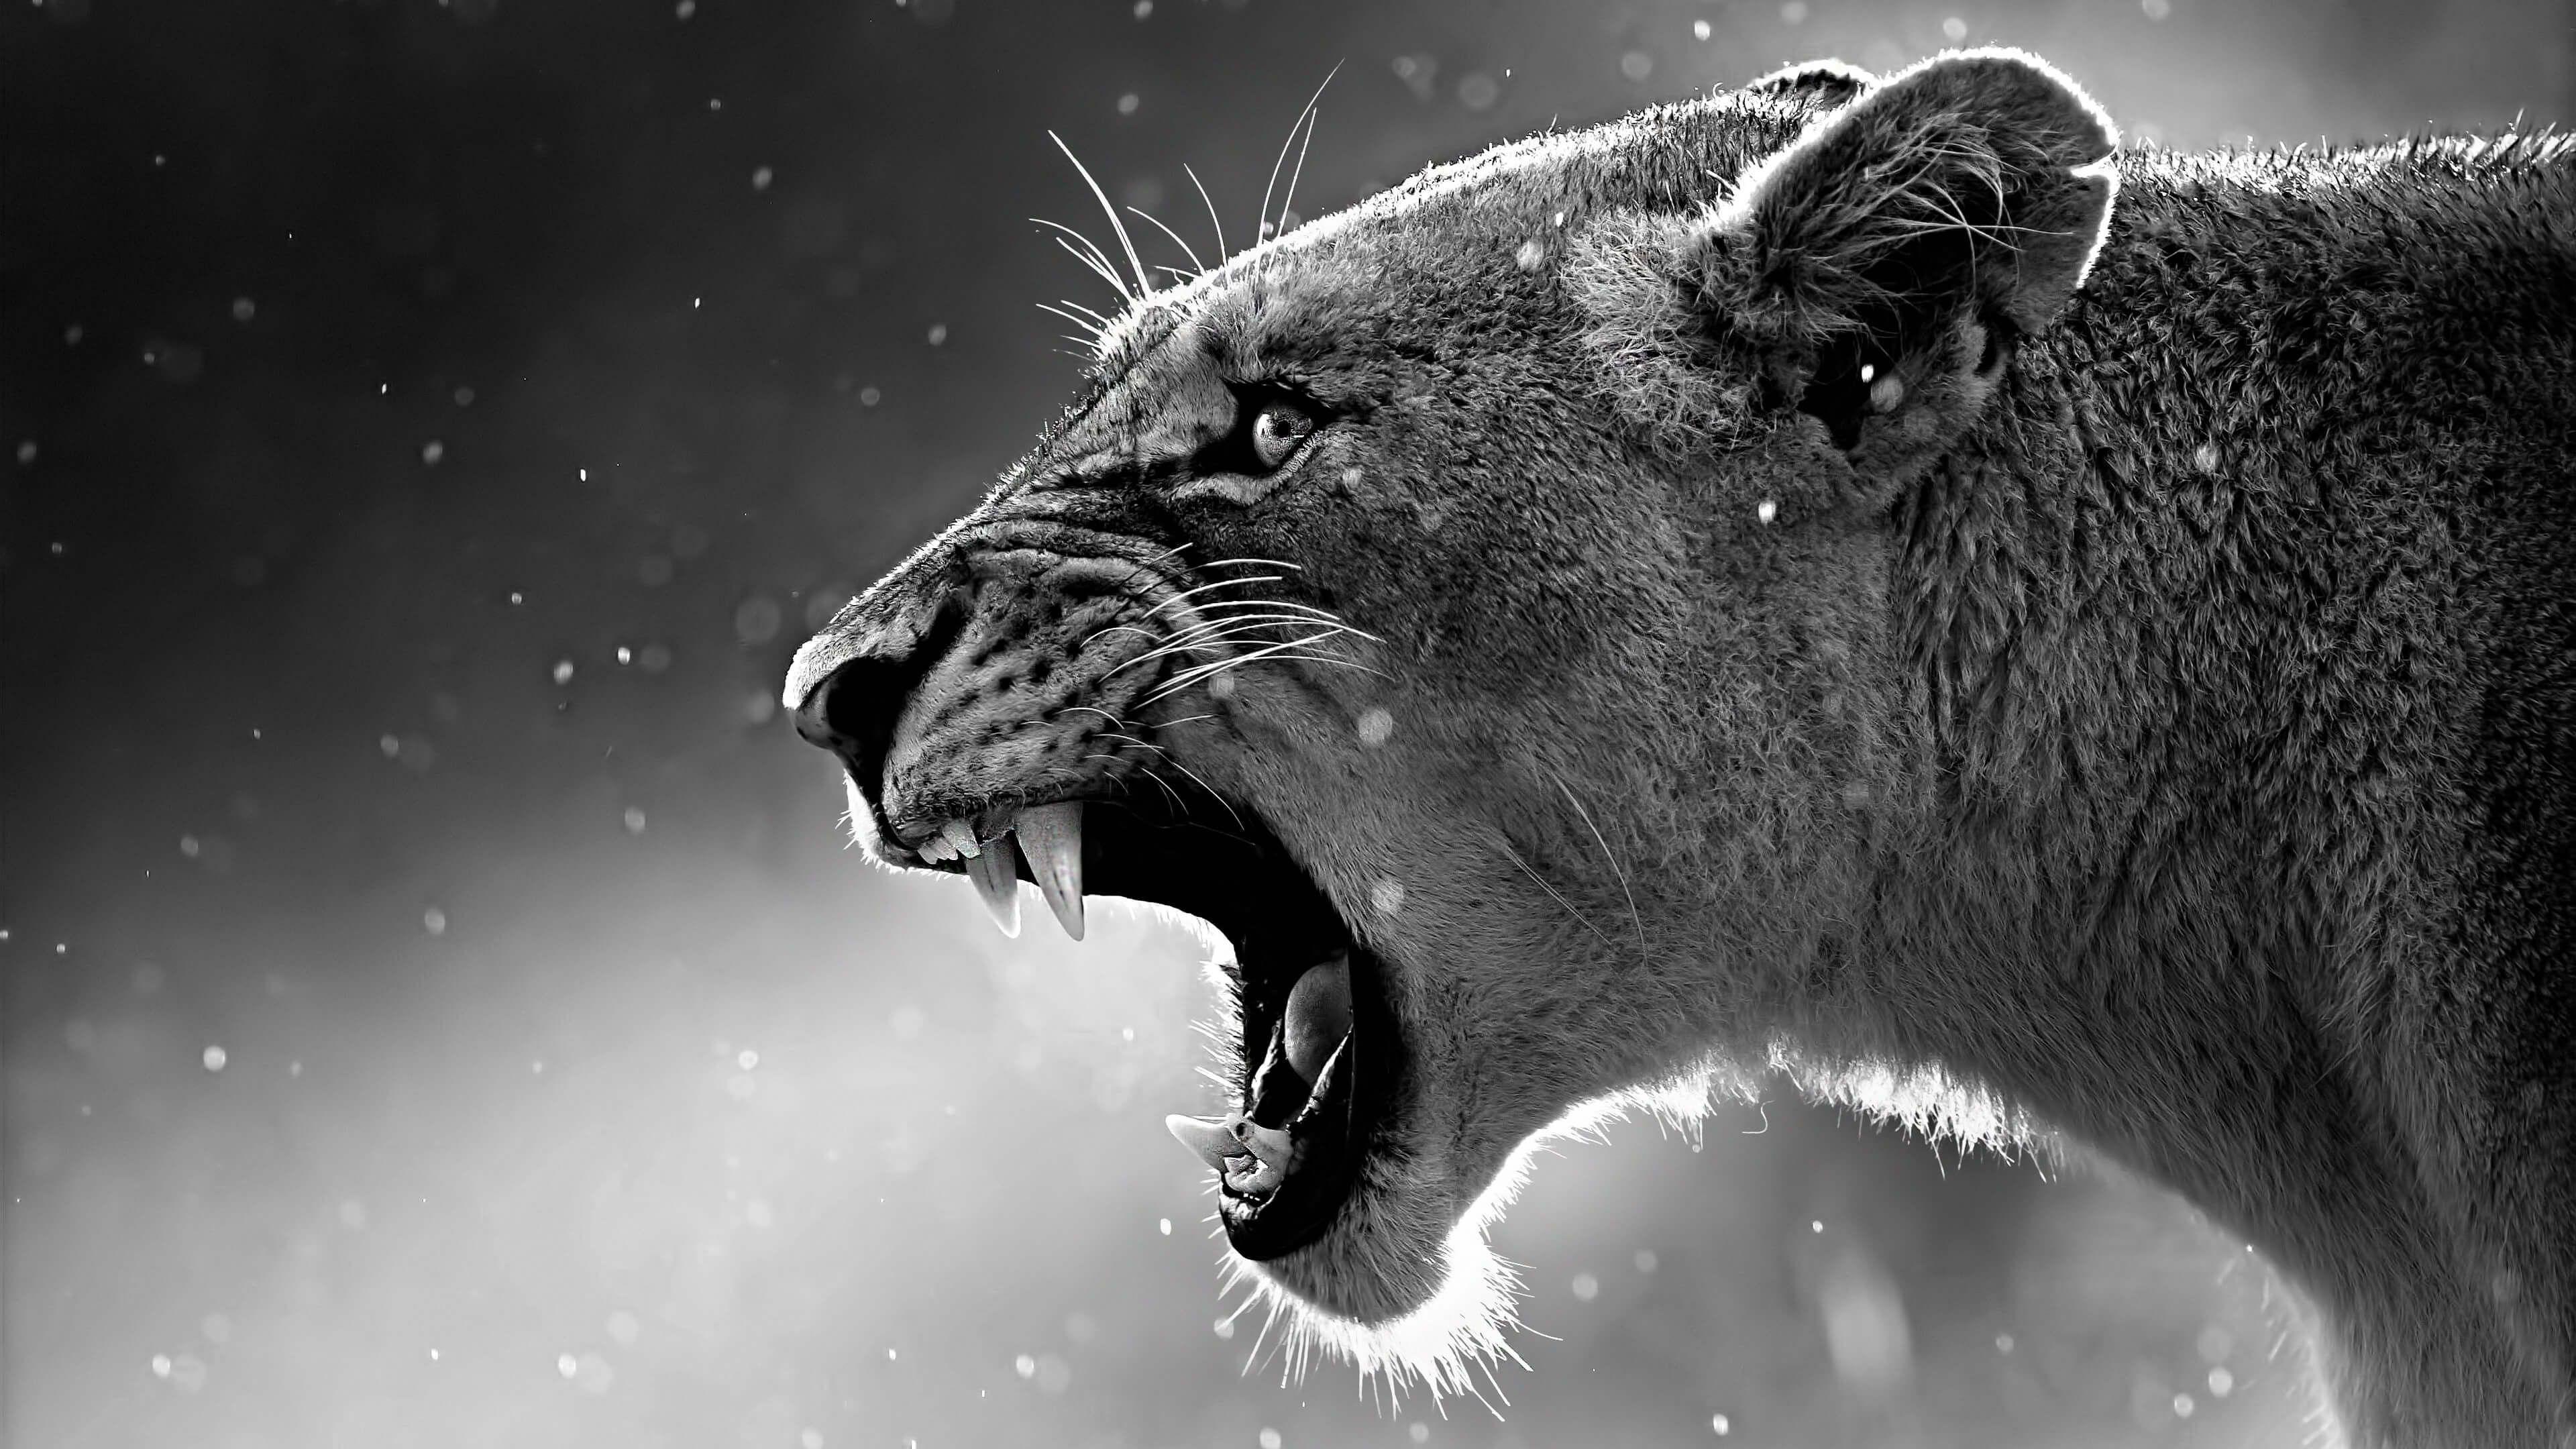 4K-resolution Black and White Logo - Download Lioness Howl Close Up 4K Wallpaper From UHD Black And White